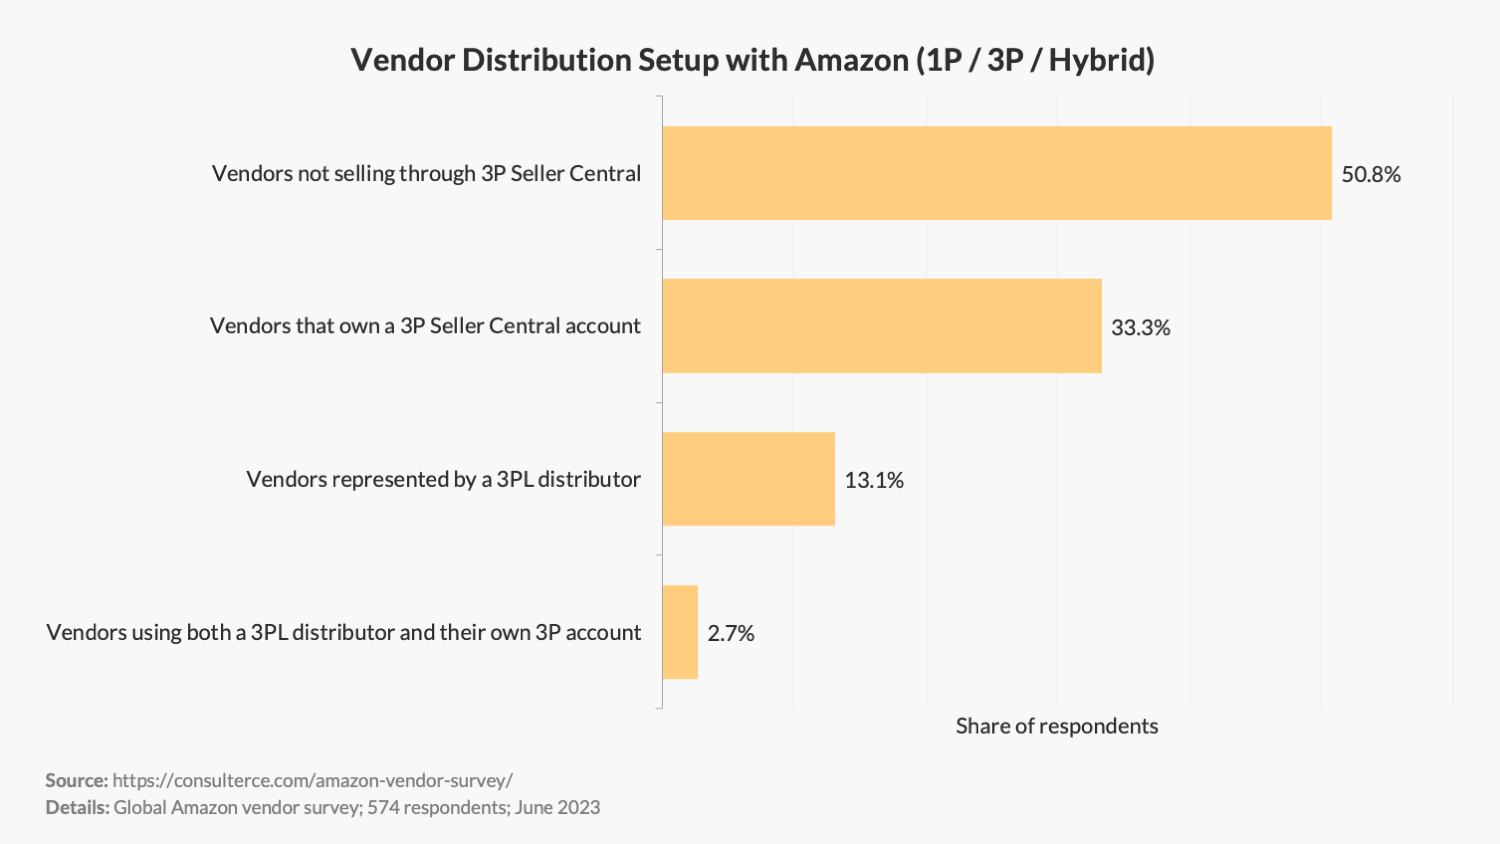 First-Party Vendor Sales Distribution Setup with Amazon